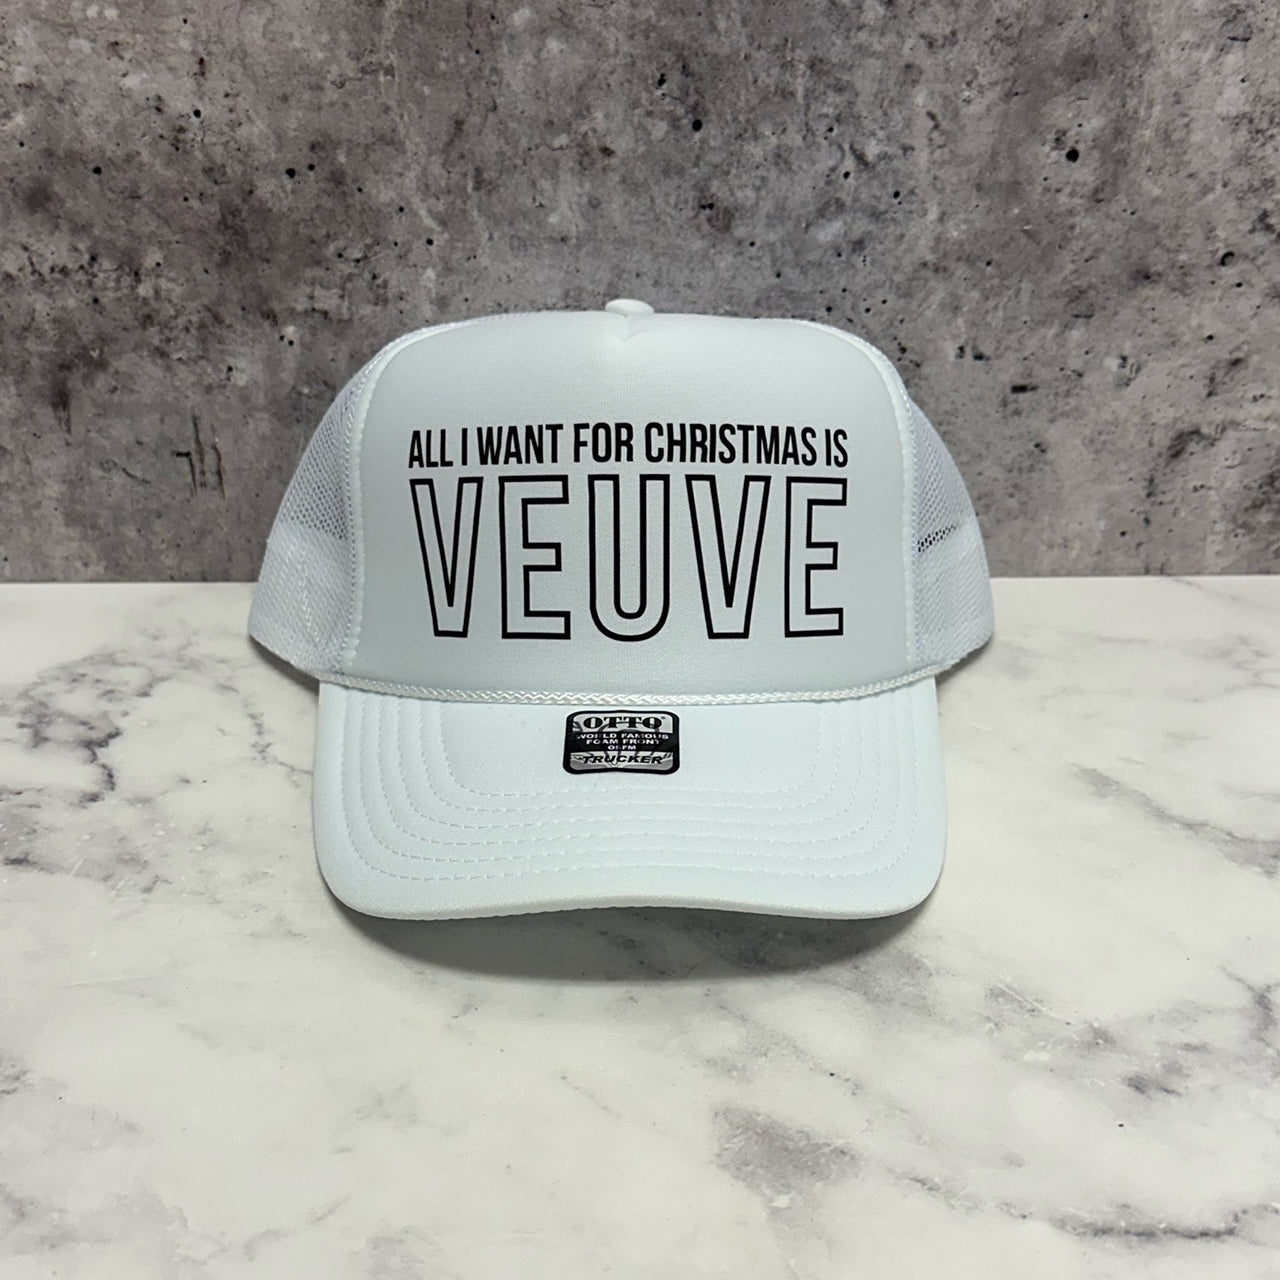 All I want for Christmas is Veuve Christmas Trucker Hat